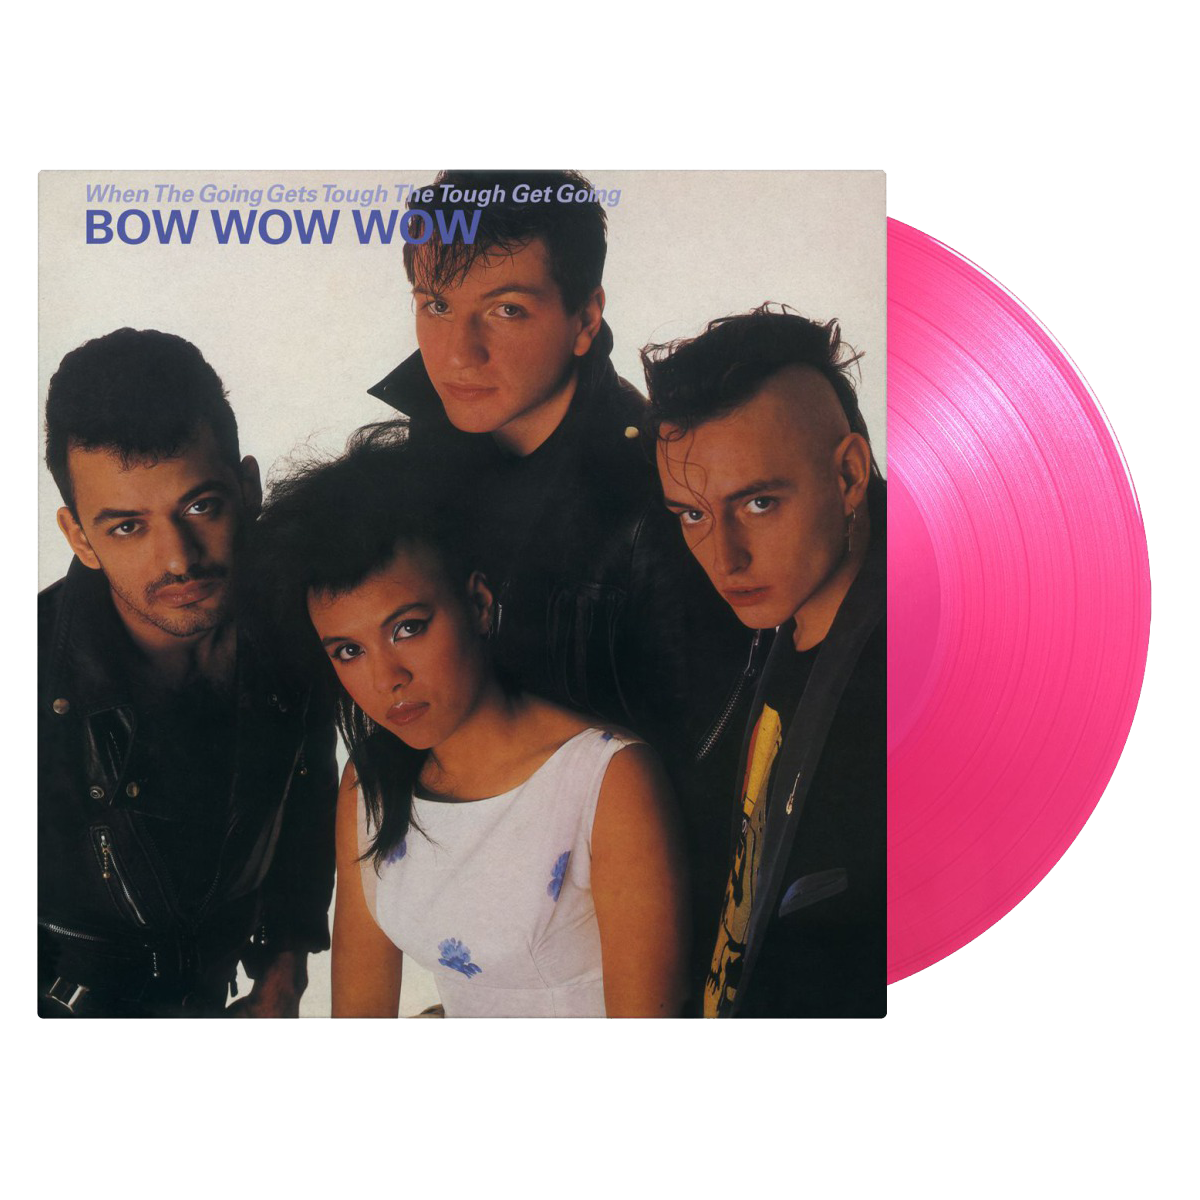 When the Going Gets Tough, the Tough Get Going: Limited Edition Pink Vinyl LP